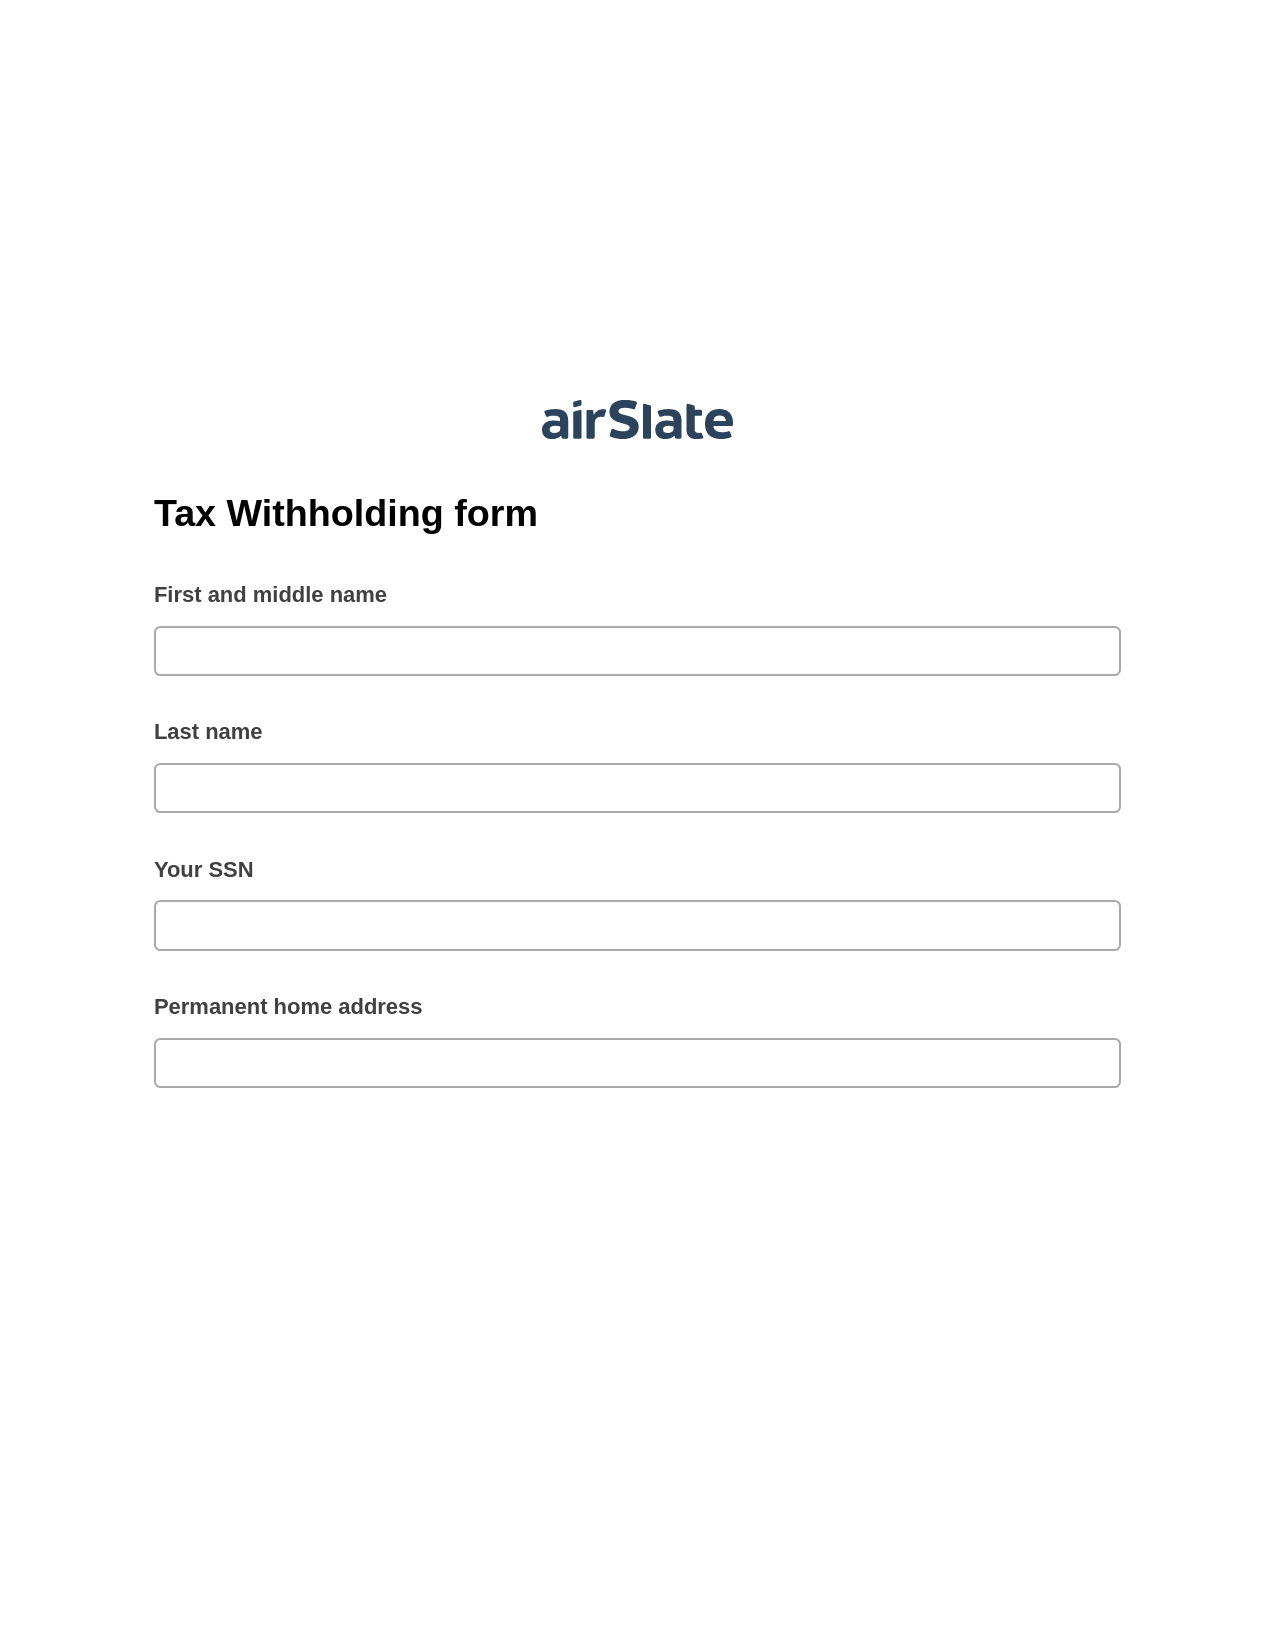 Multirole Tax Withholding form Pre-fill Dropdowns from CSV File Bot, Lock the Slate Bot, Export to Excel 365 Bot